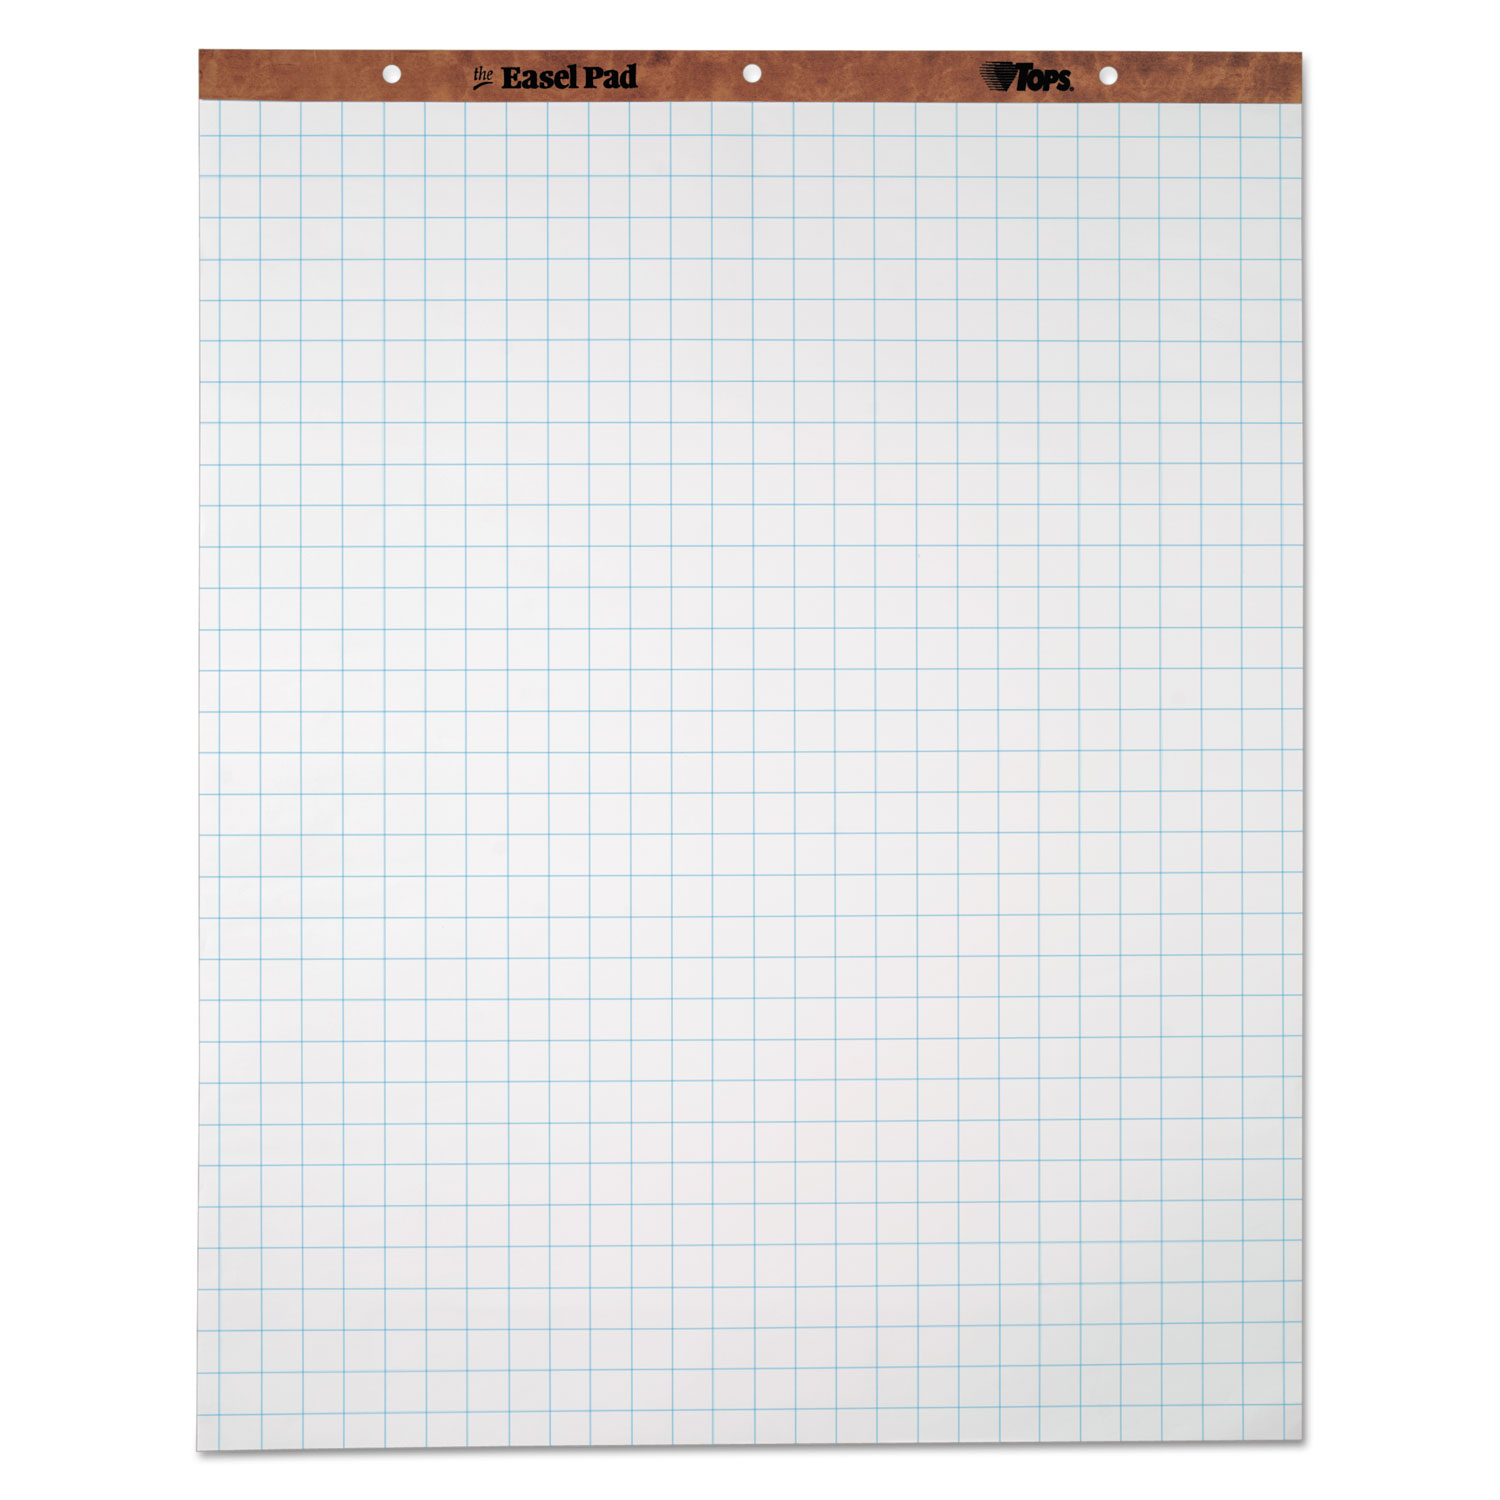  TOPS 7900 Easel Pads, 27 x 34, White, 50 Sheets, 4/Carton (TOP7900) 